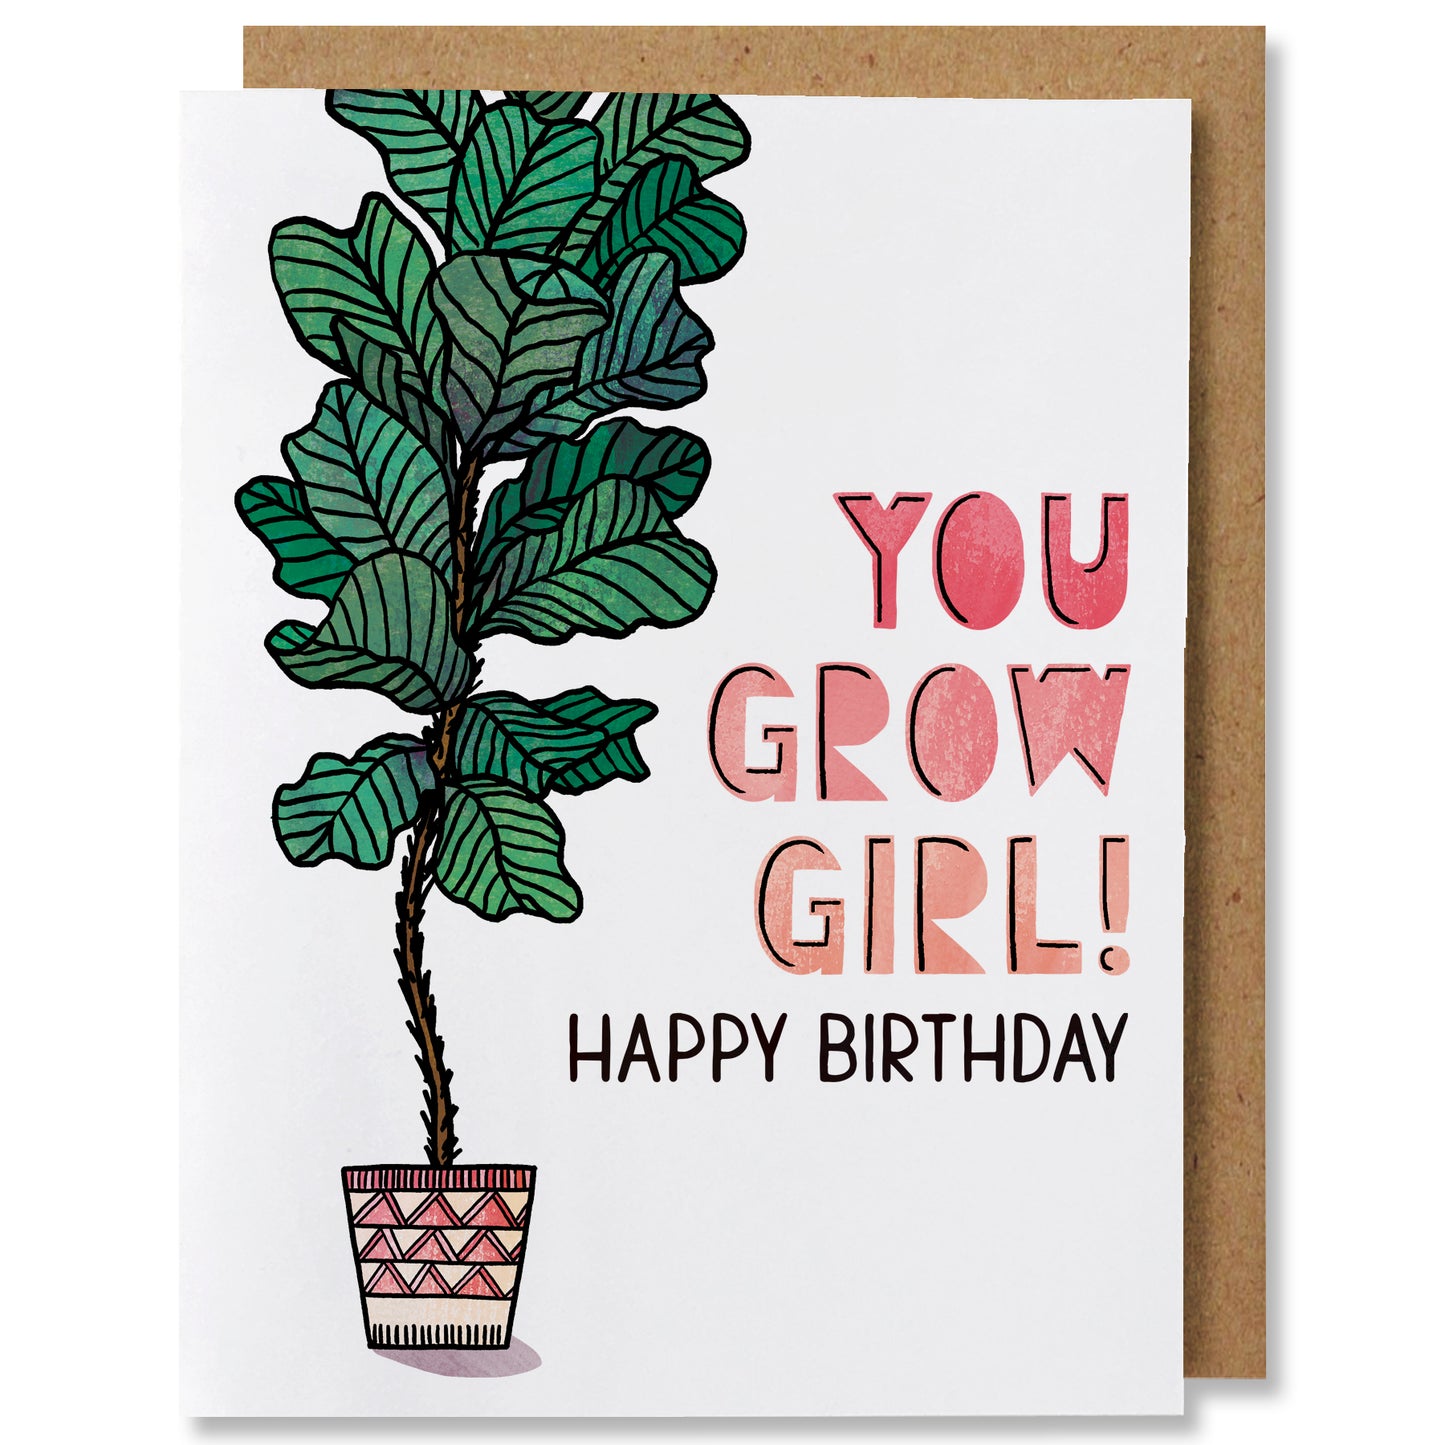 An illustrated greeting card featuring a fiddle leaf fig in a planter on the left, with the caption "you grow girl!" and "happy birthday" on the right in three shades of pink